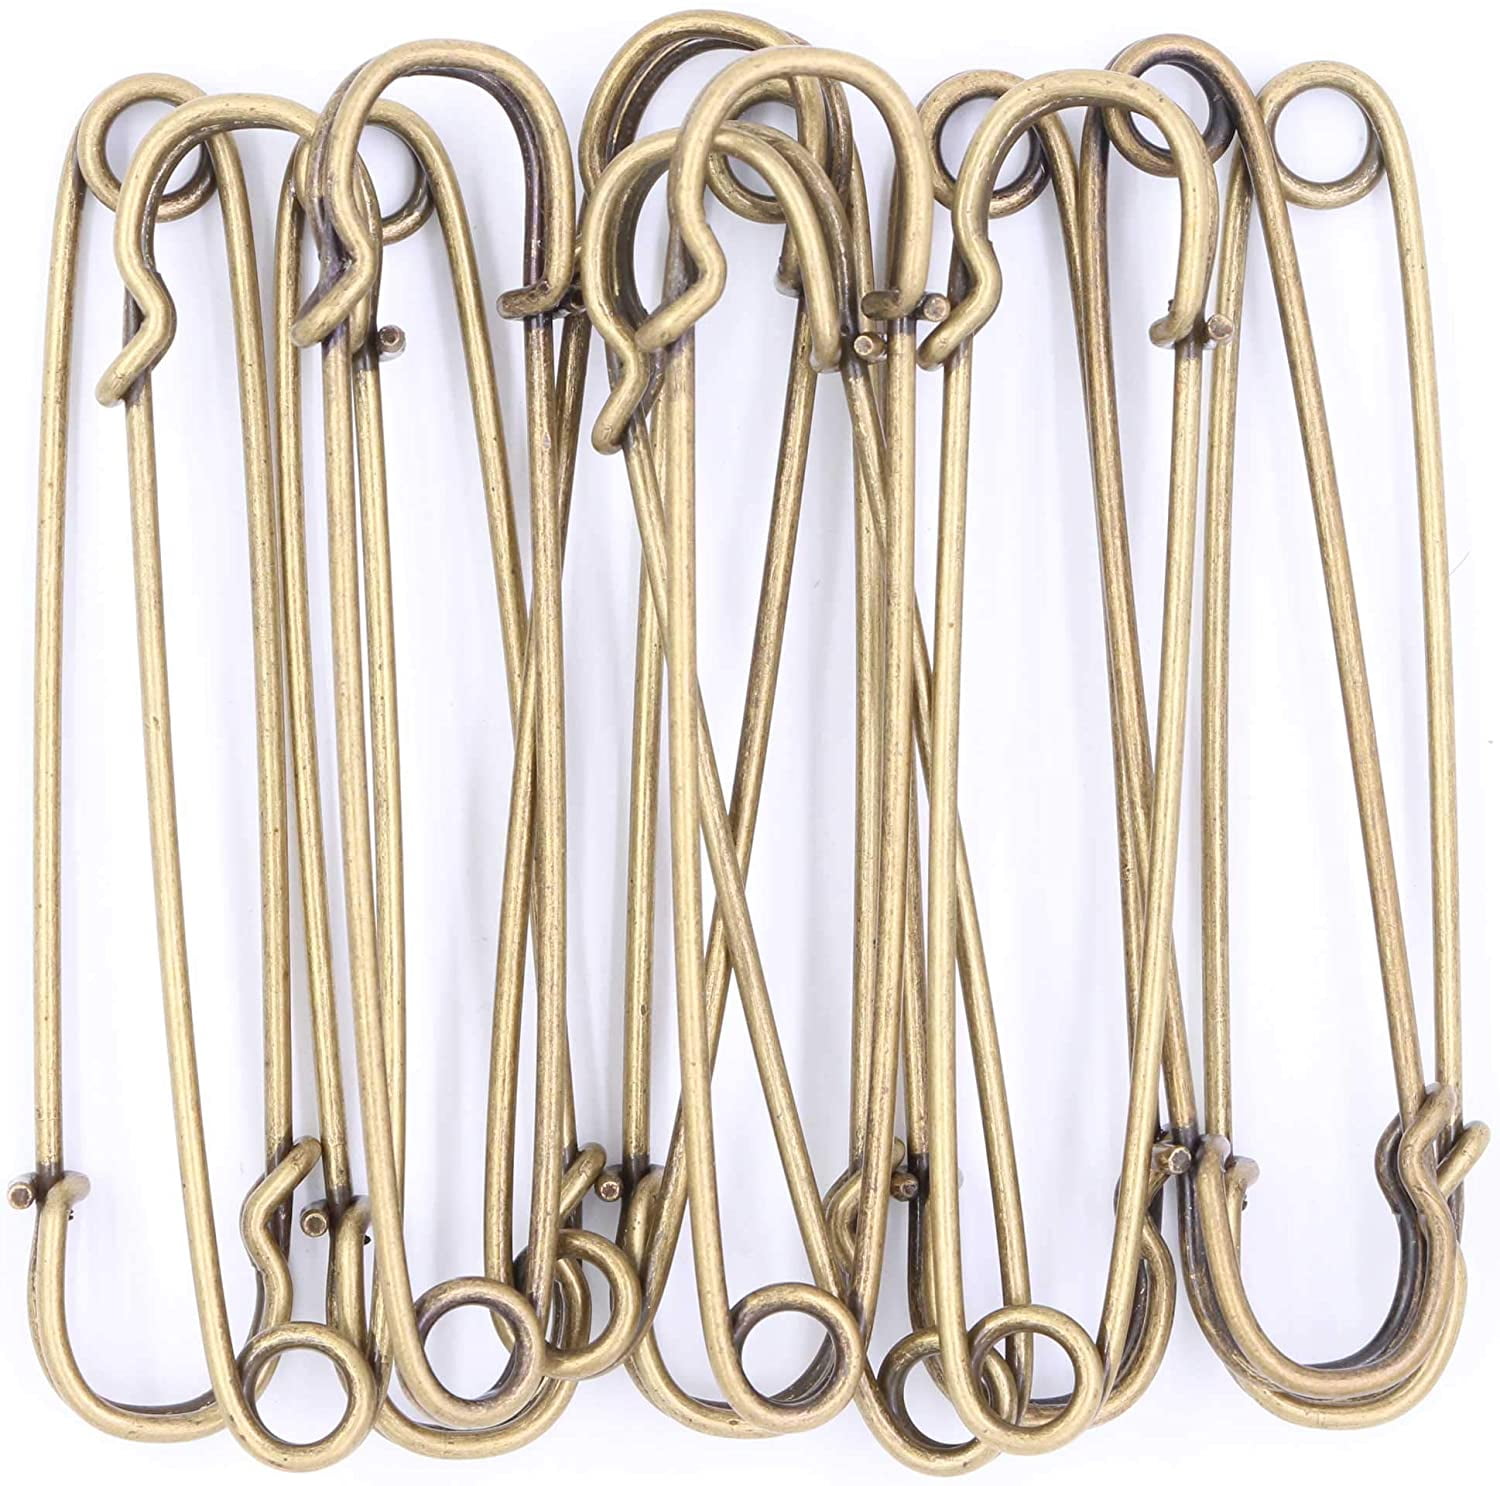 Large Brass Heavy Duty Industrial Safety Pin / Over Sized Safety Pin /  Large Kilt Pin / Industrial Size Safety Pin 